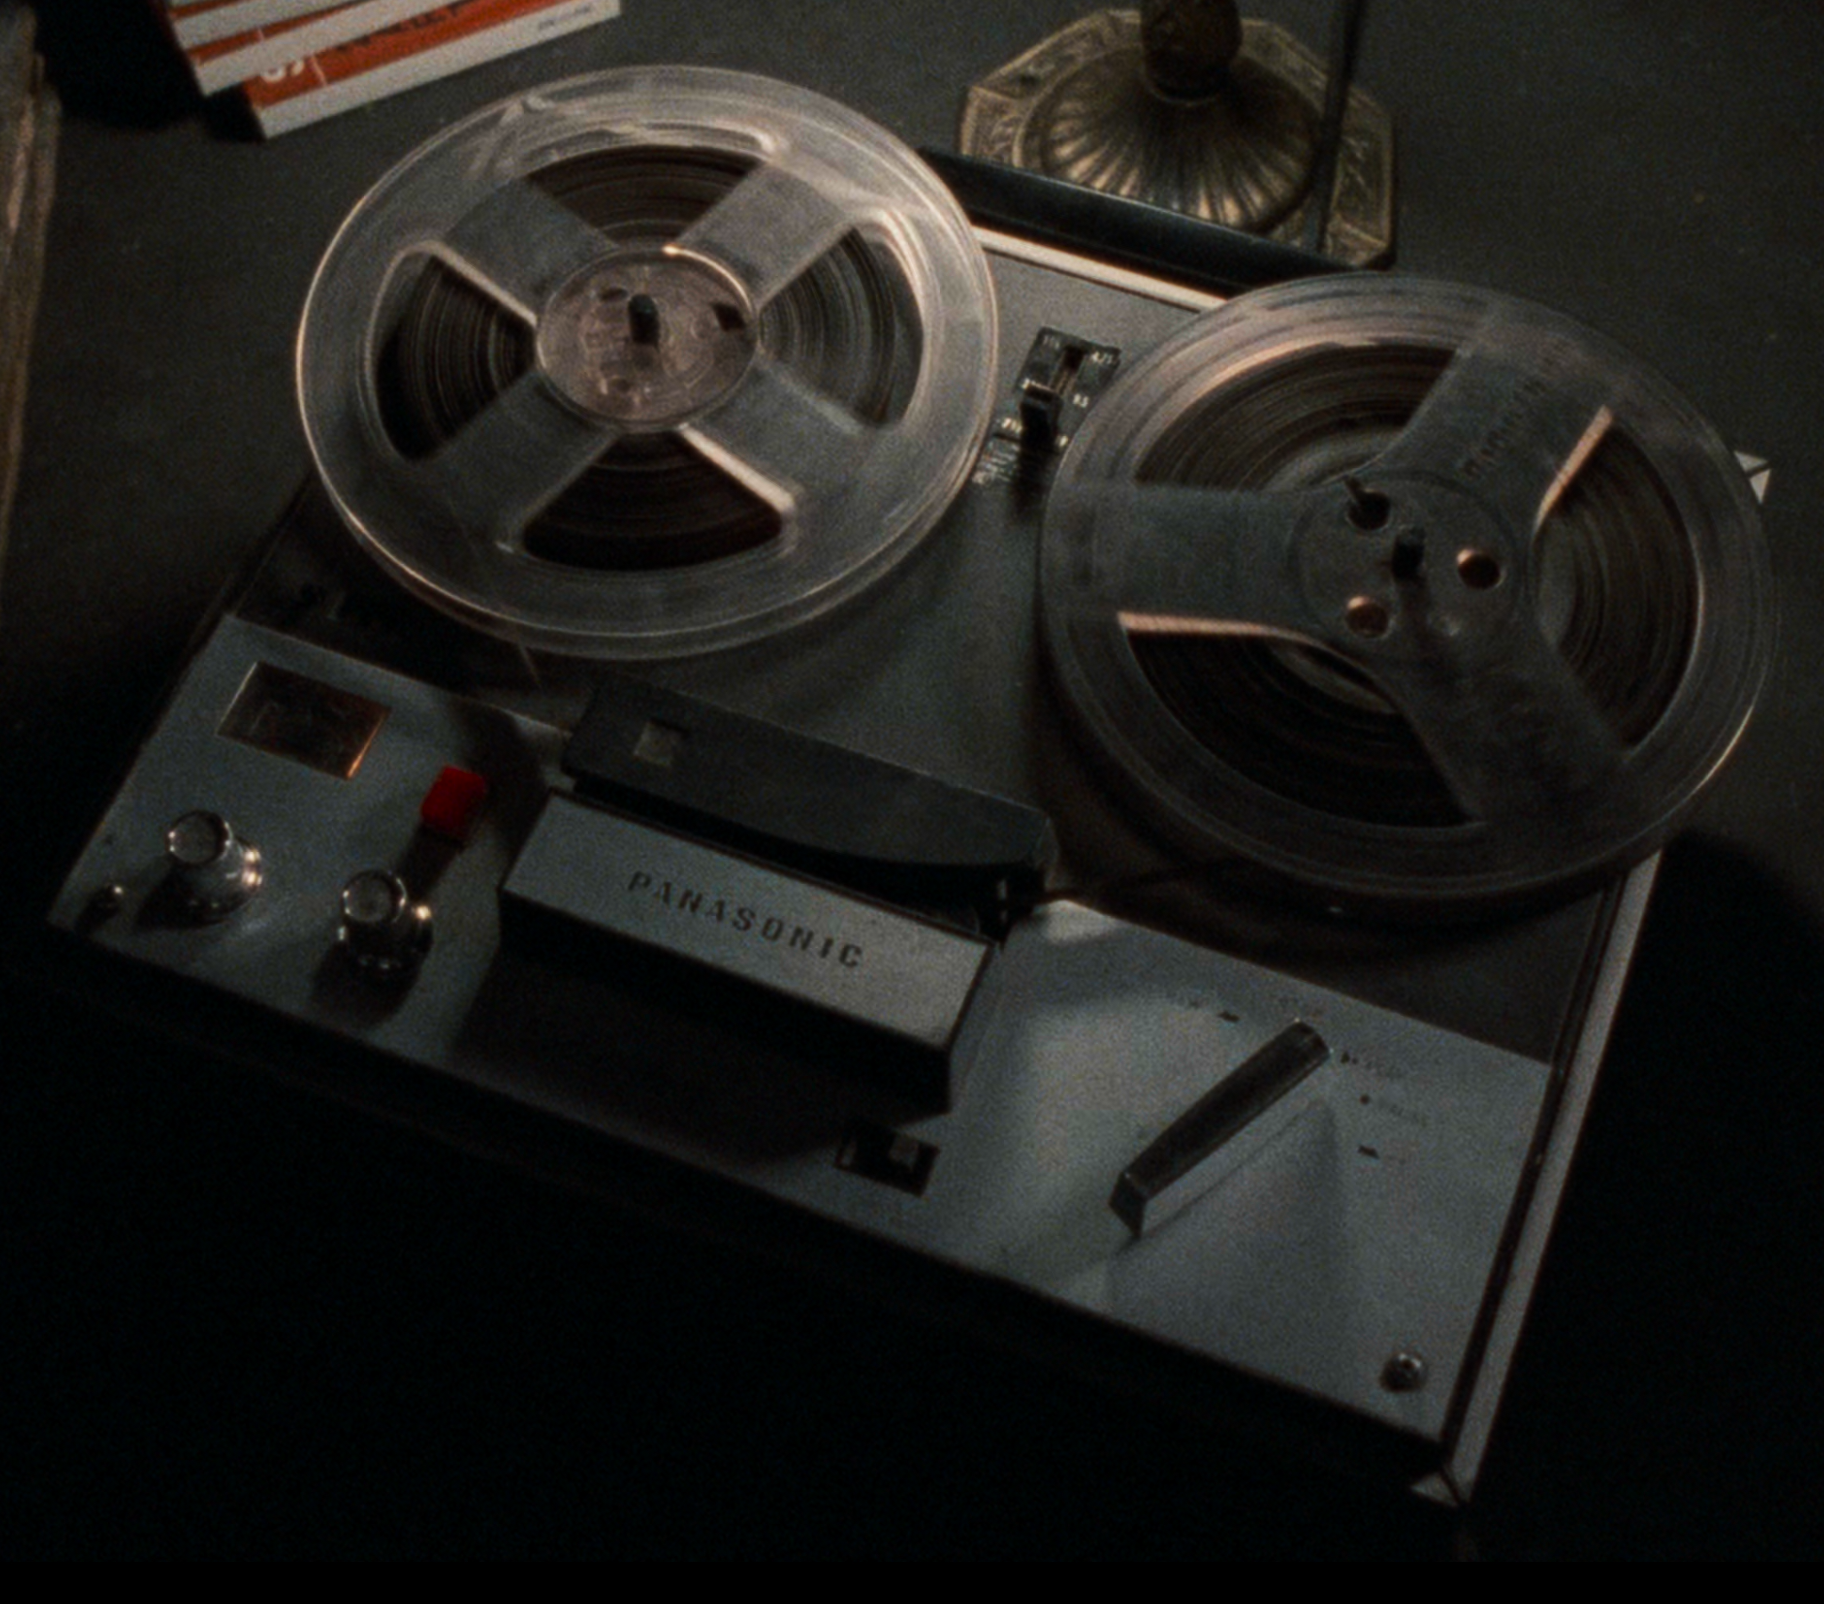 https://static.wikia.nocookie.net/evildead/images/d/db/TapeRecorder-ED2.png/revision/latest?cb=20200413165032